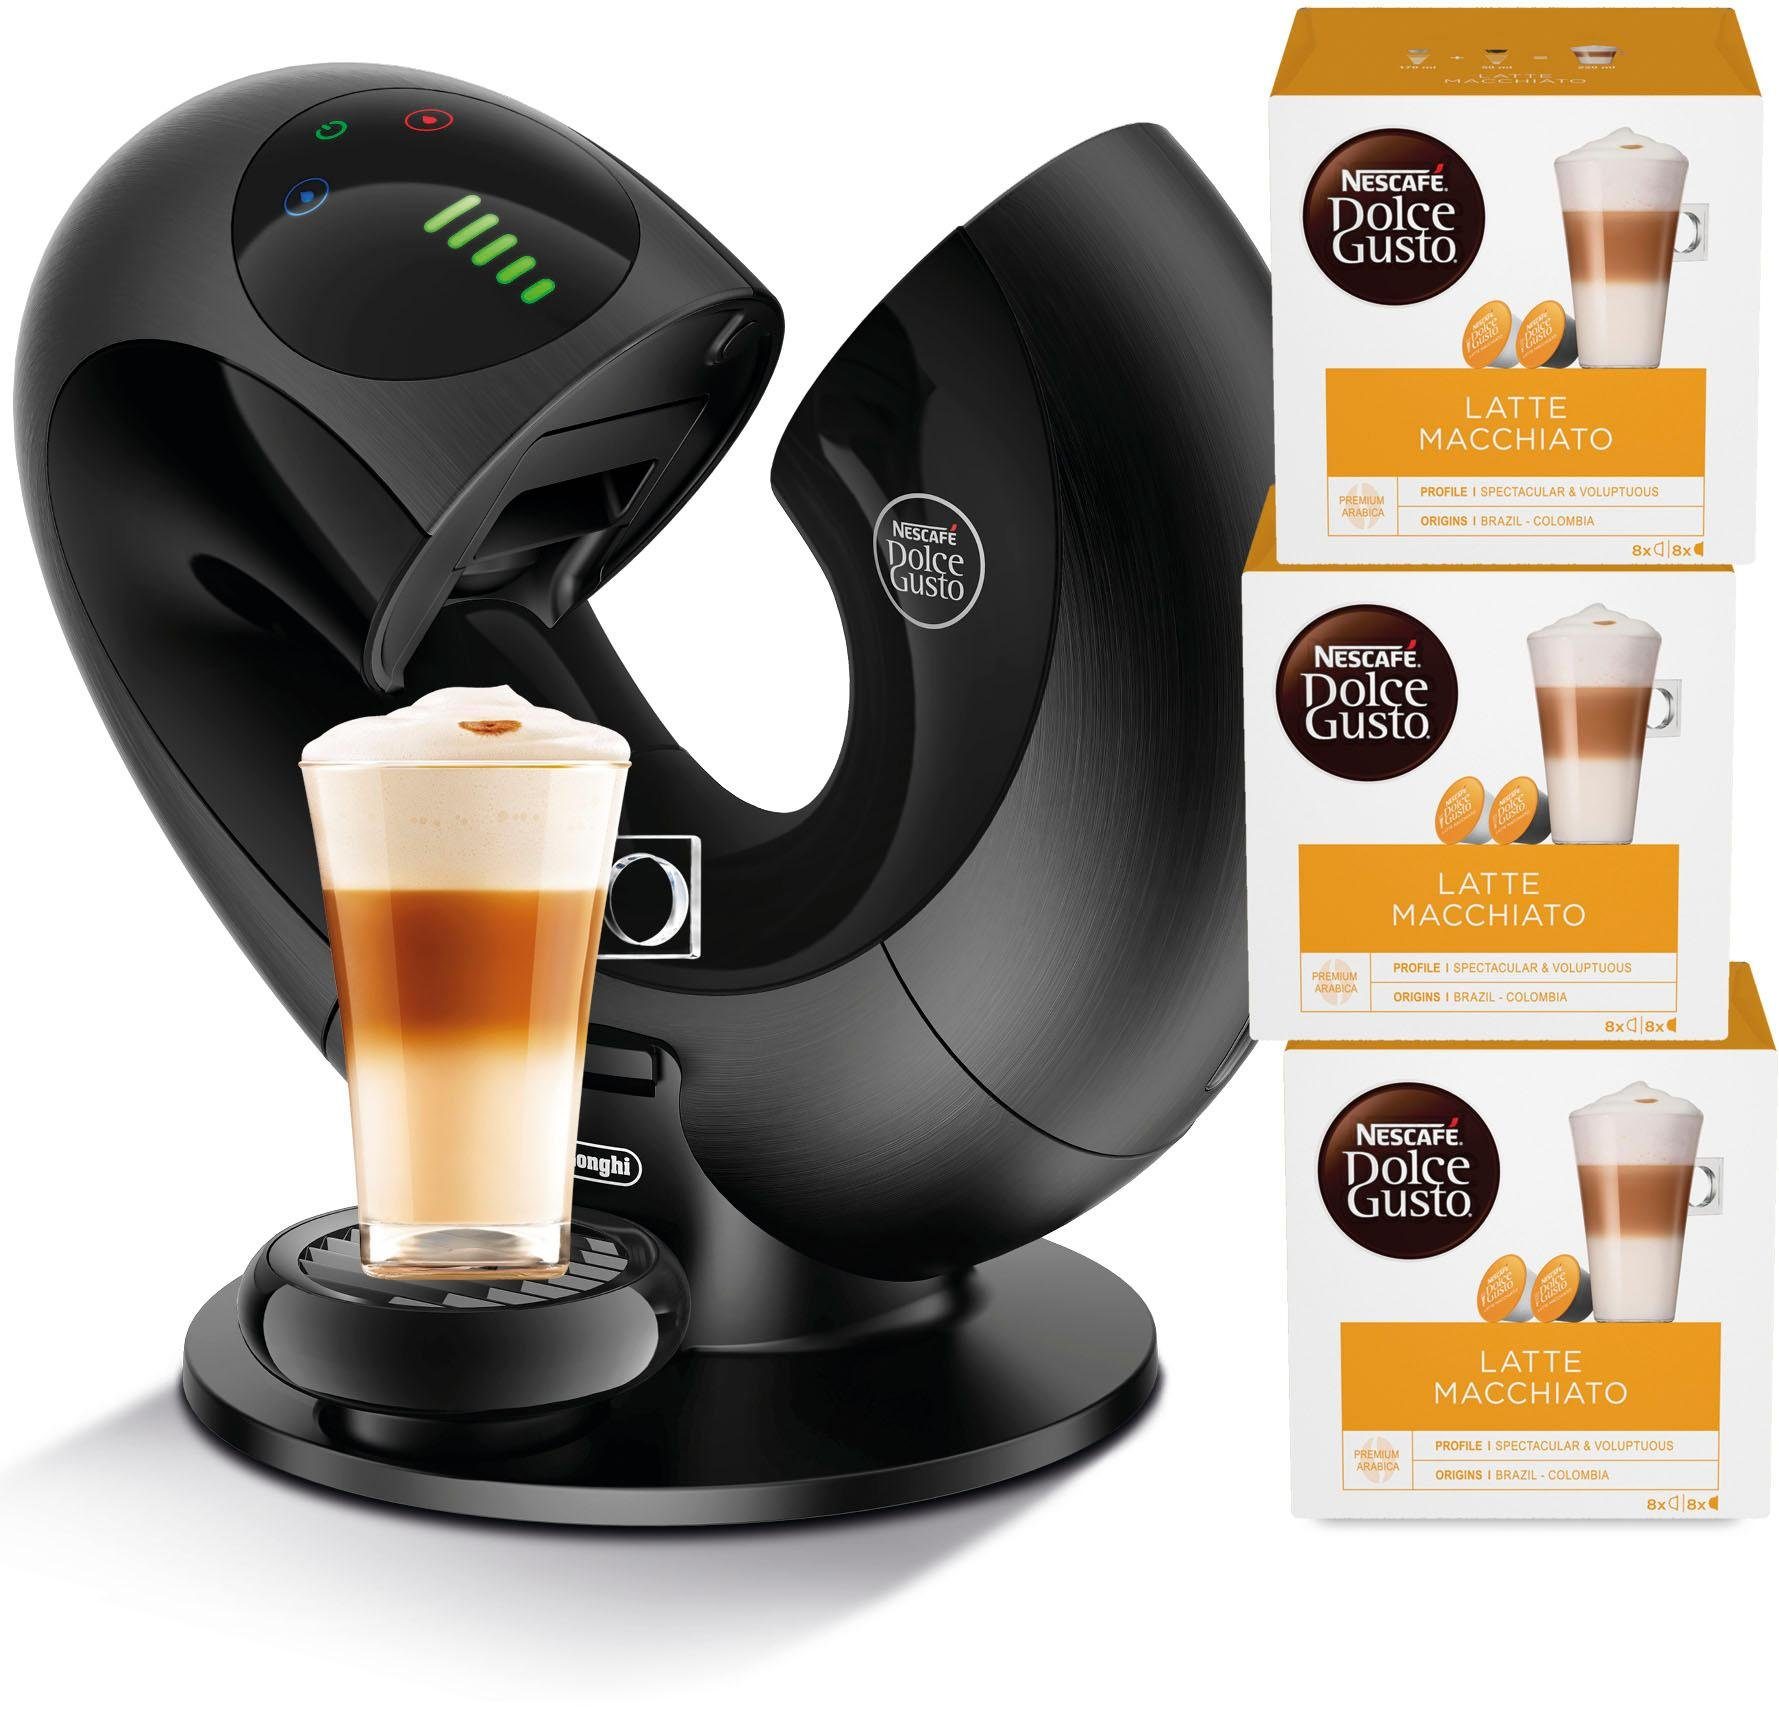 Dolce gusto цена. Nescafe Dolce gusto. Nescafe Dolce gusto EDG 455. Дольче густо что густо. Nescafe Dolce gusto edg646 белая.